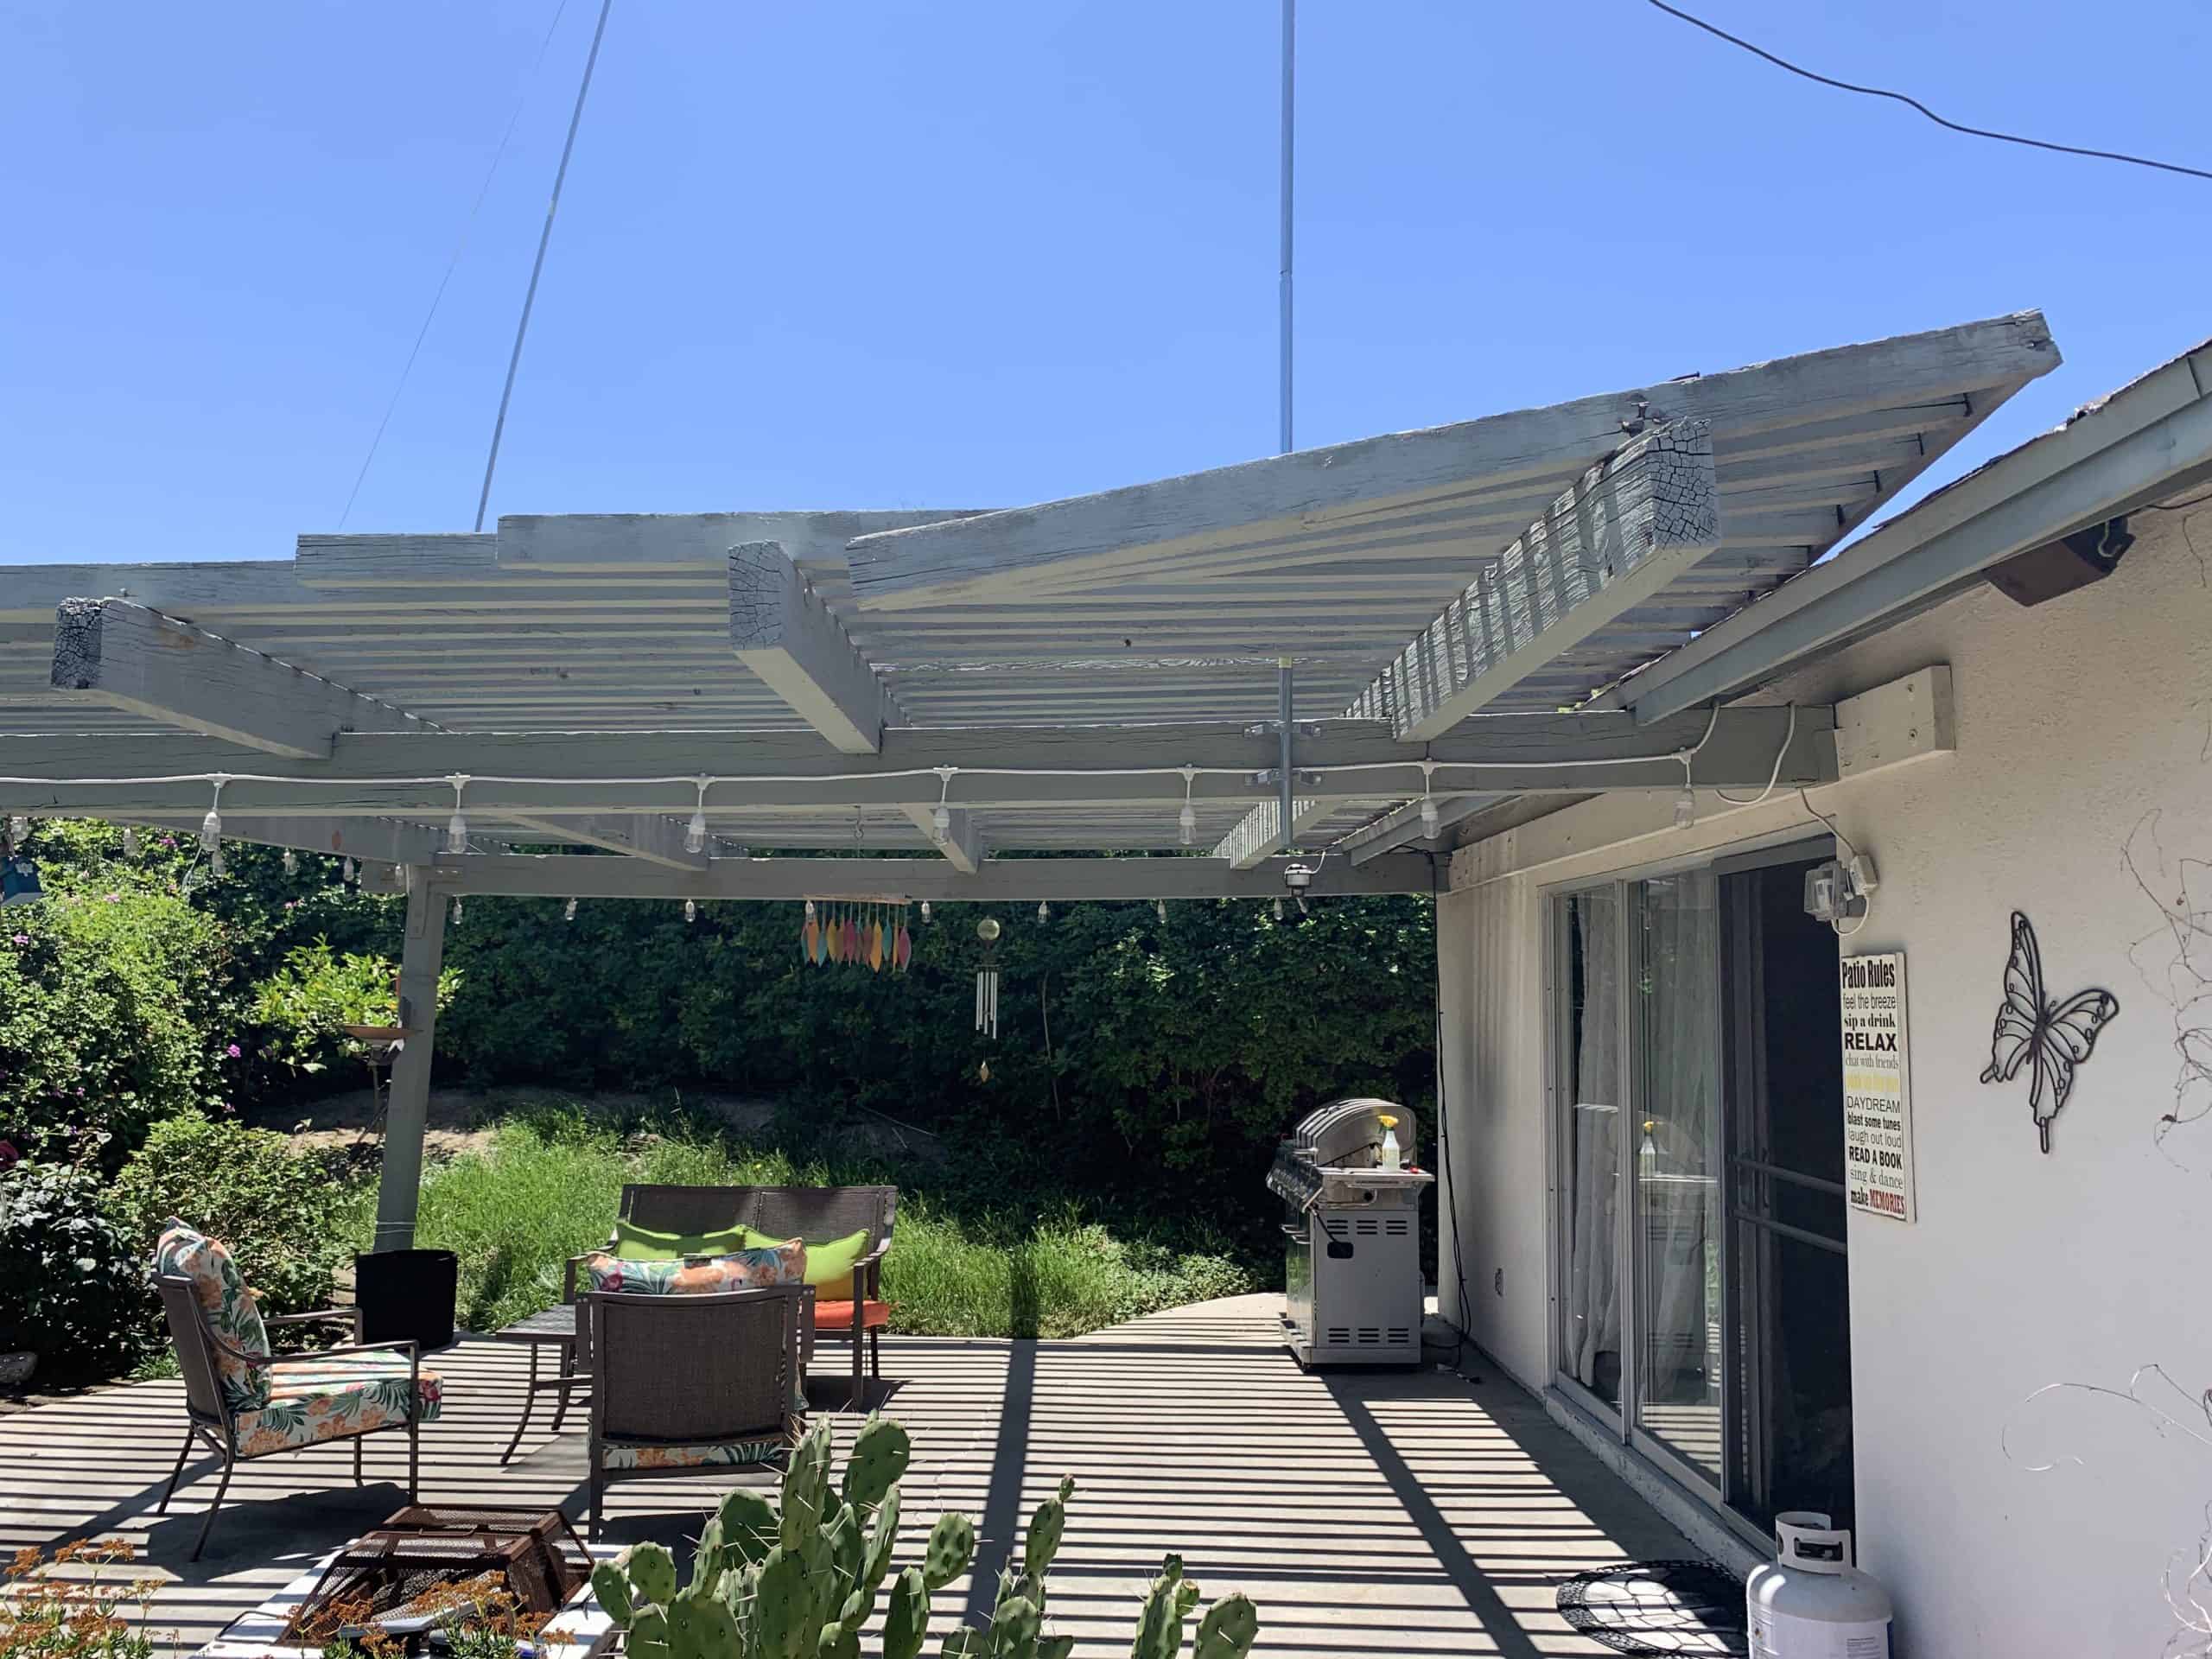 Alumawood Patio Covers in Cypress, Ca., Design & Construction